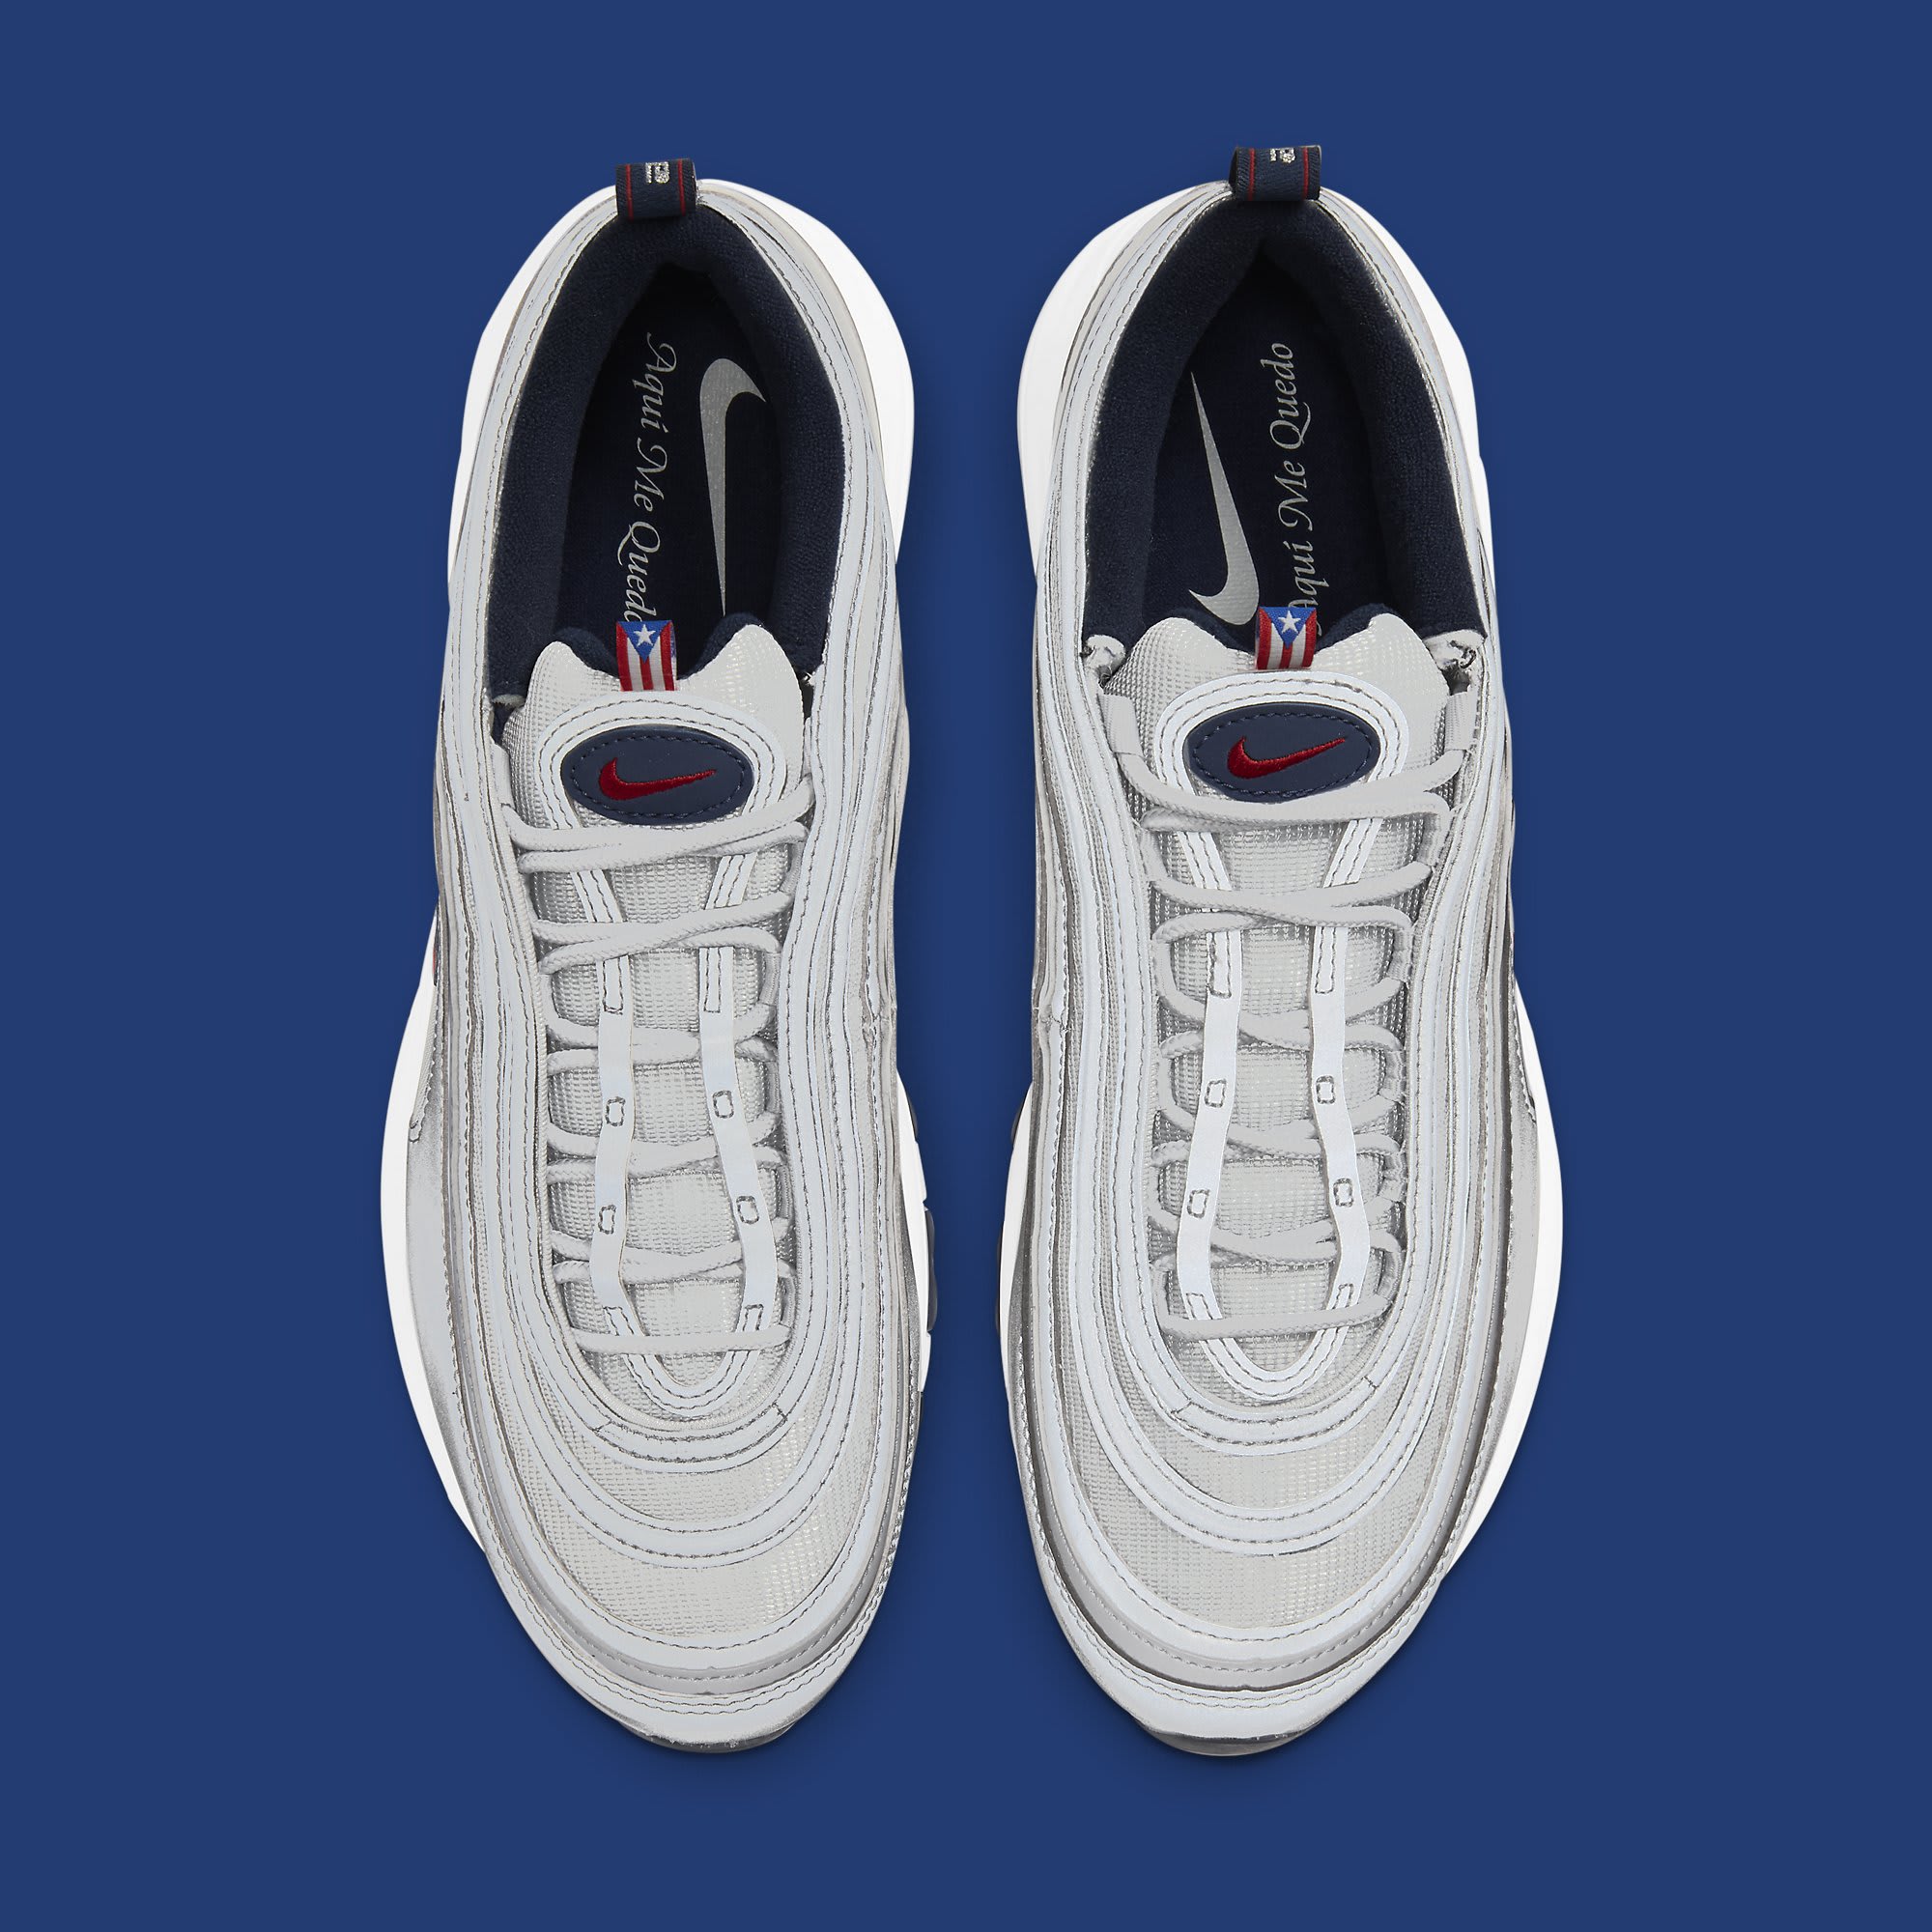 Nike Air Max 97 Og Sp Prd Puerto Rico Dh2319 001 Release Date Sole Collector